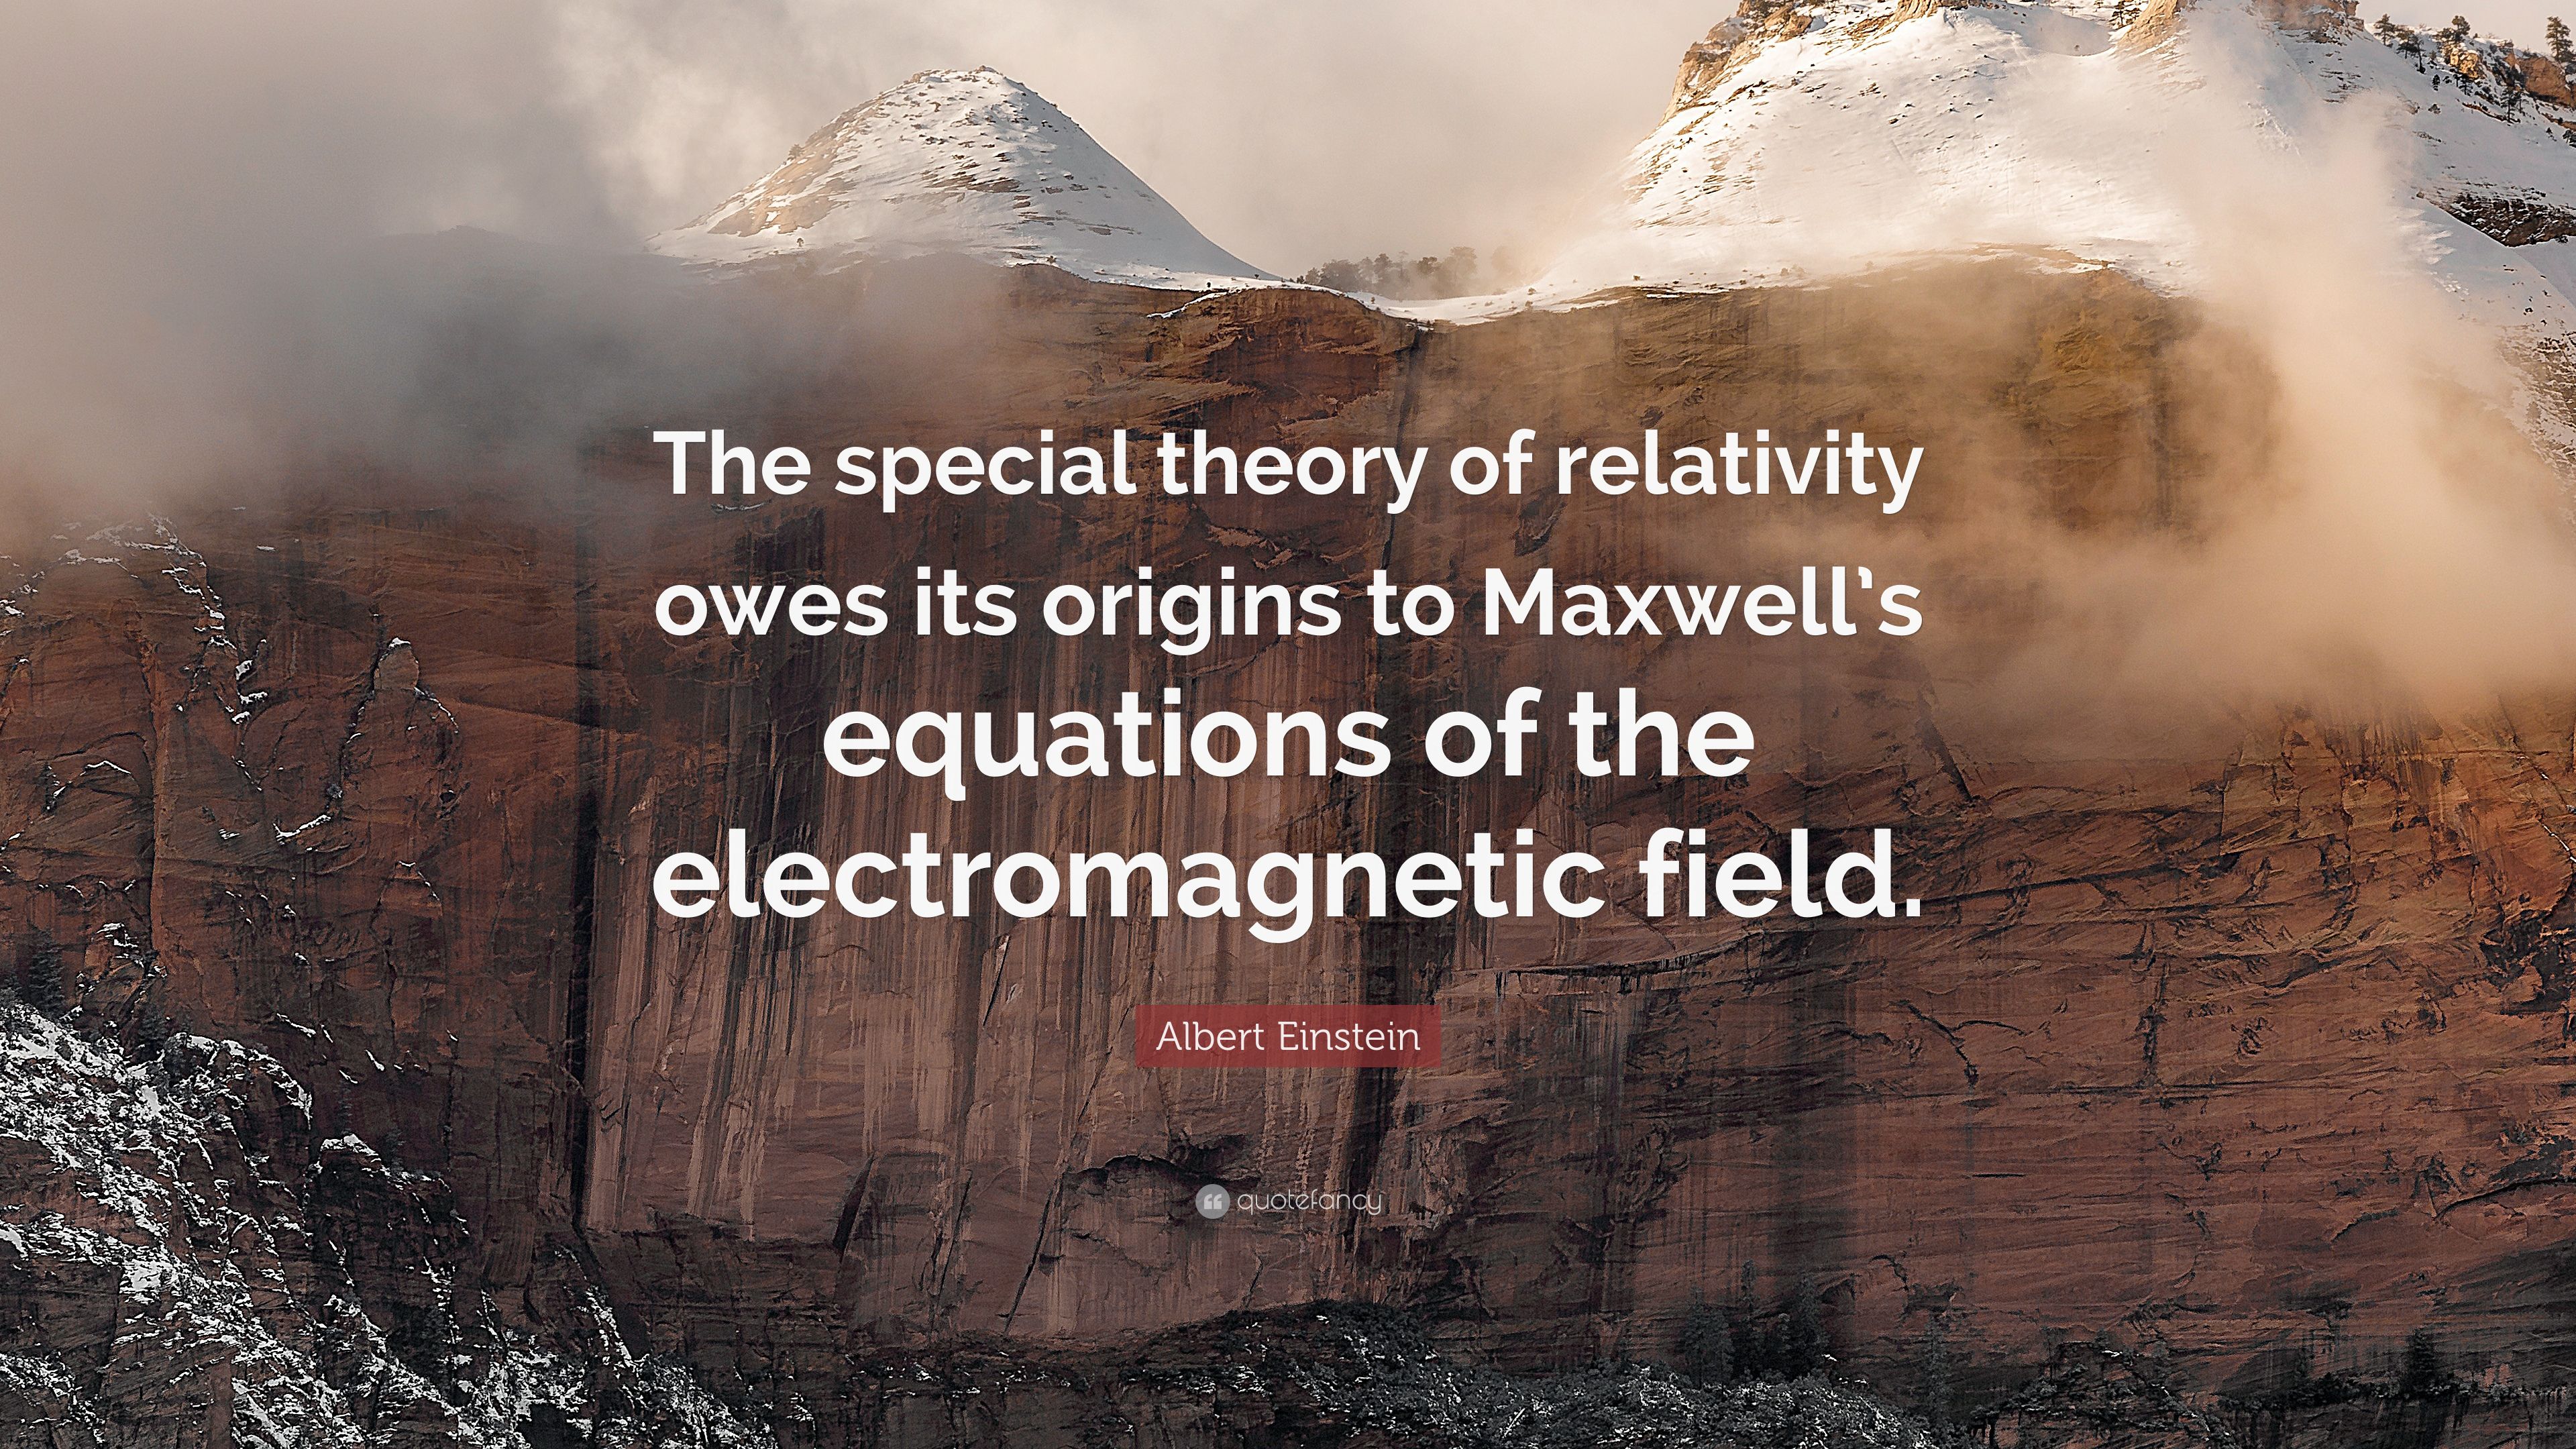 Albert Einstein Quote: “The special theory of relativity owes its